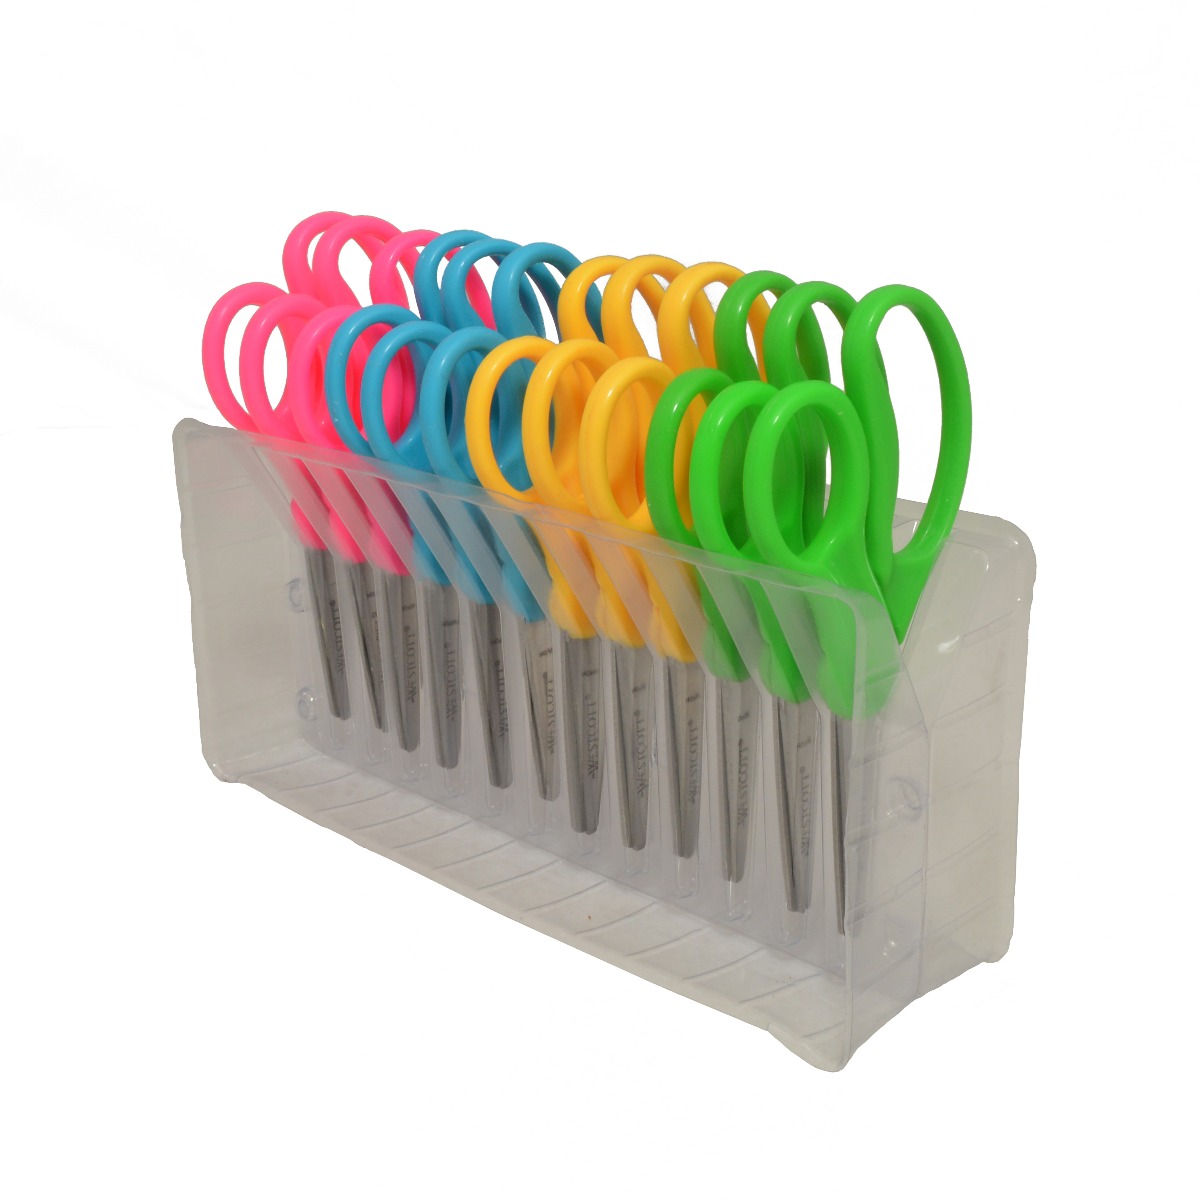 https://d38zcepchip0tz.cloudfront.net/media/catalog/product/1/3/13141_5in_kids_pointed_scissors_12pk_storage_angle.jpg